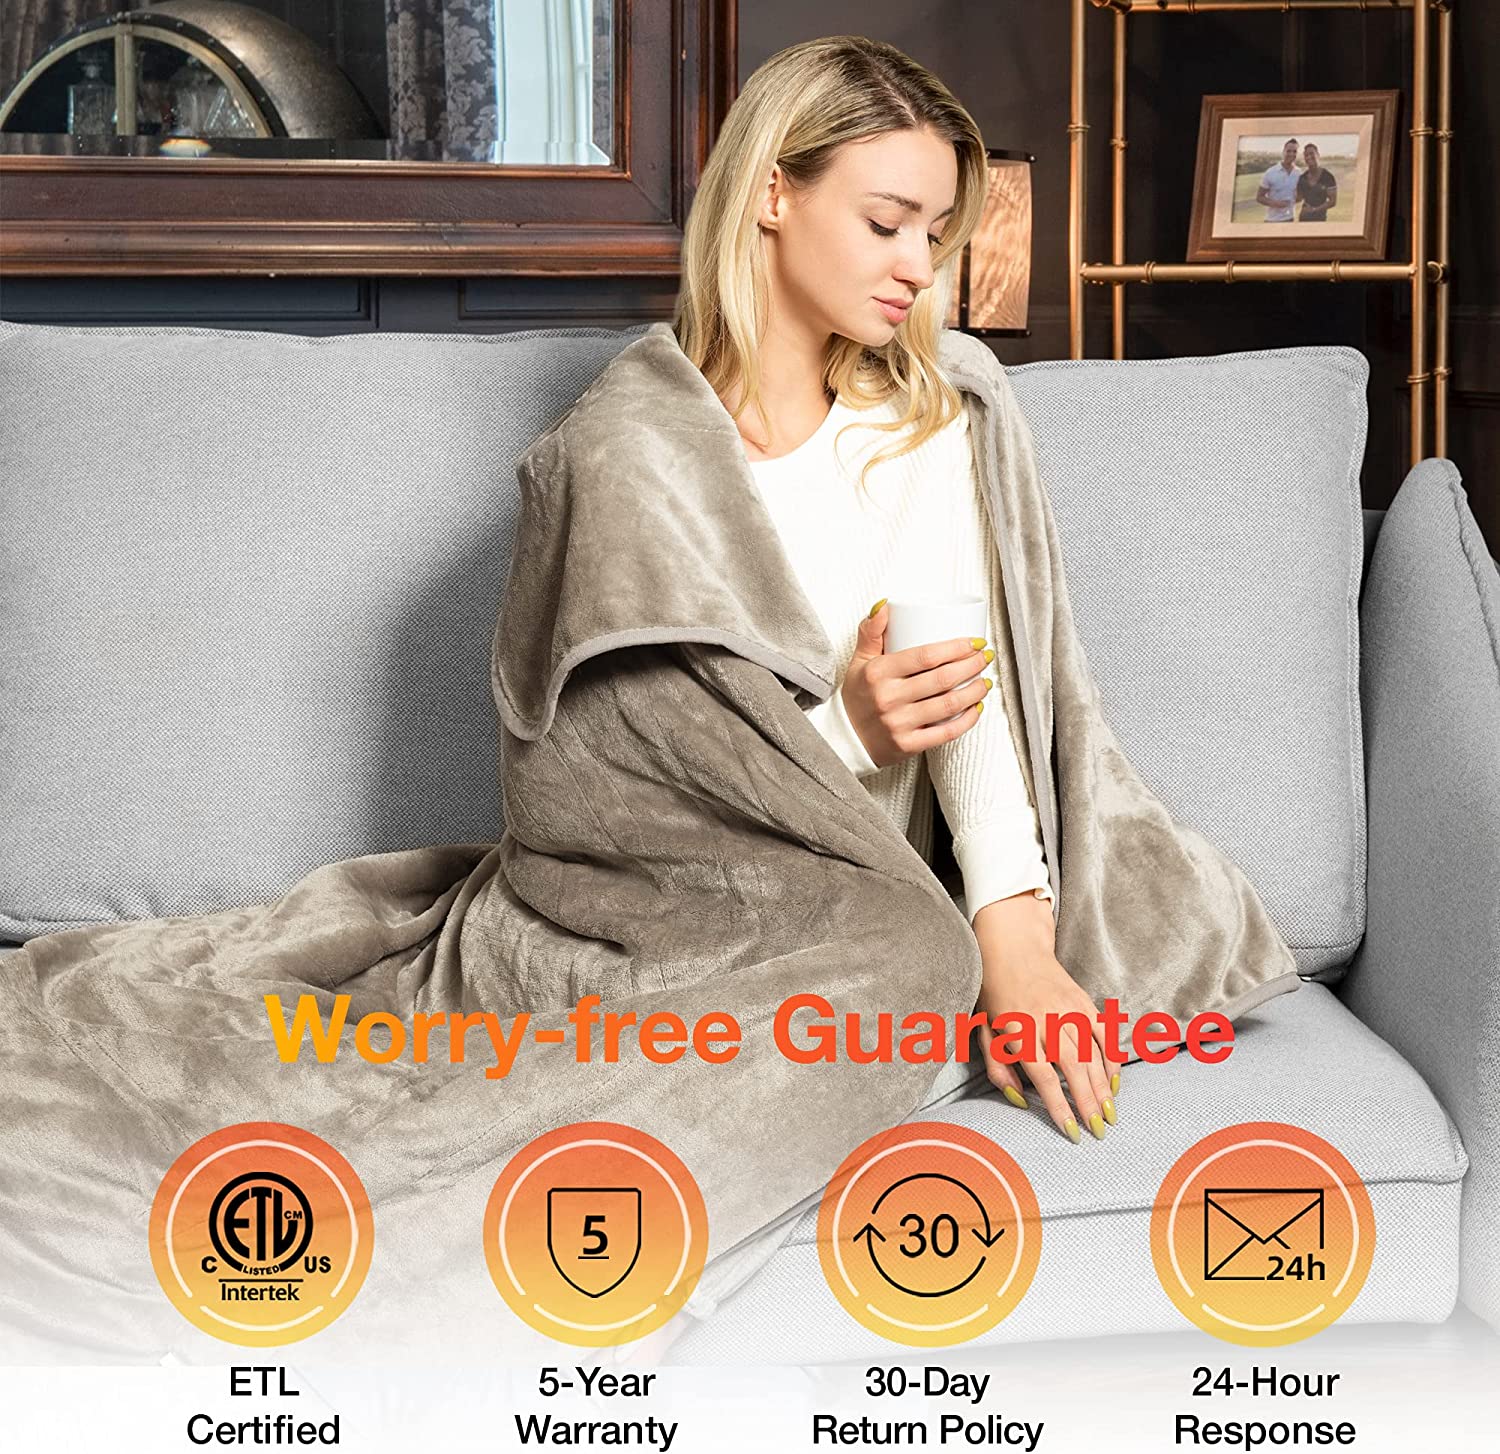 Electric Heating Throw with Foot Pocket - Taupe